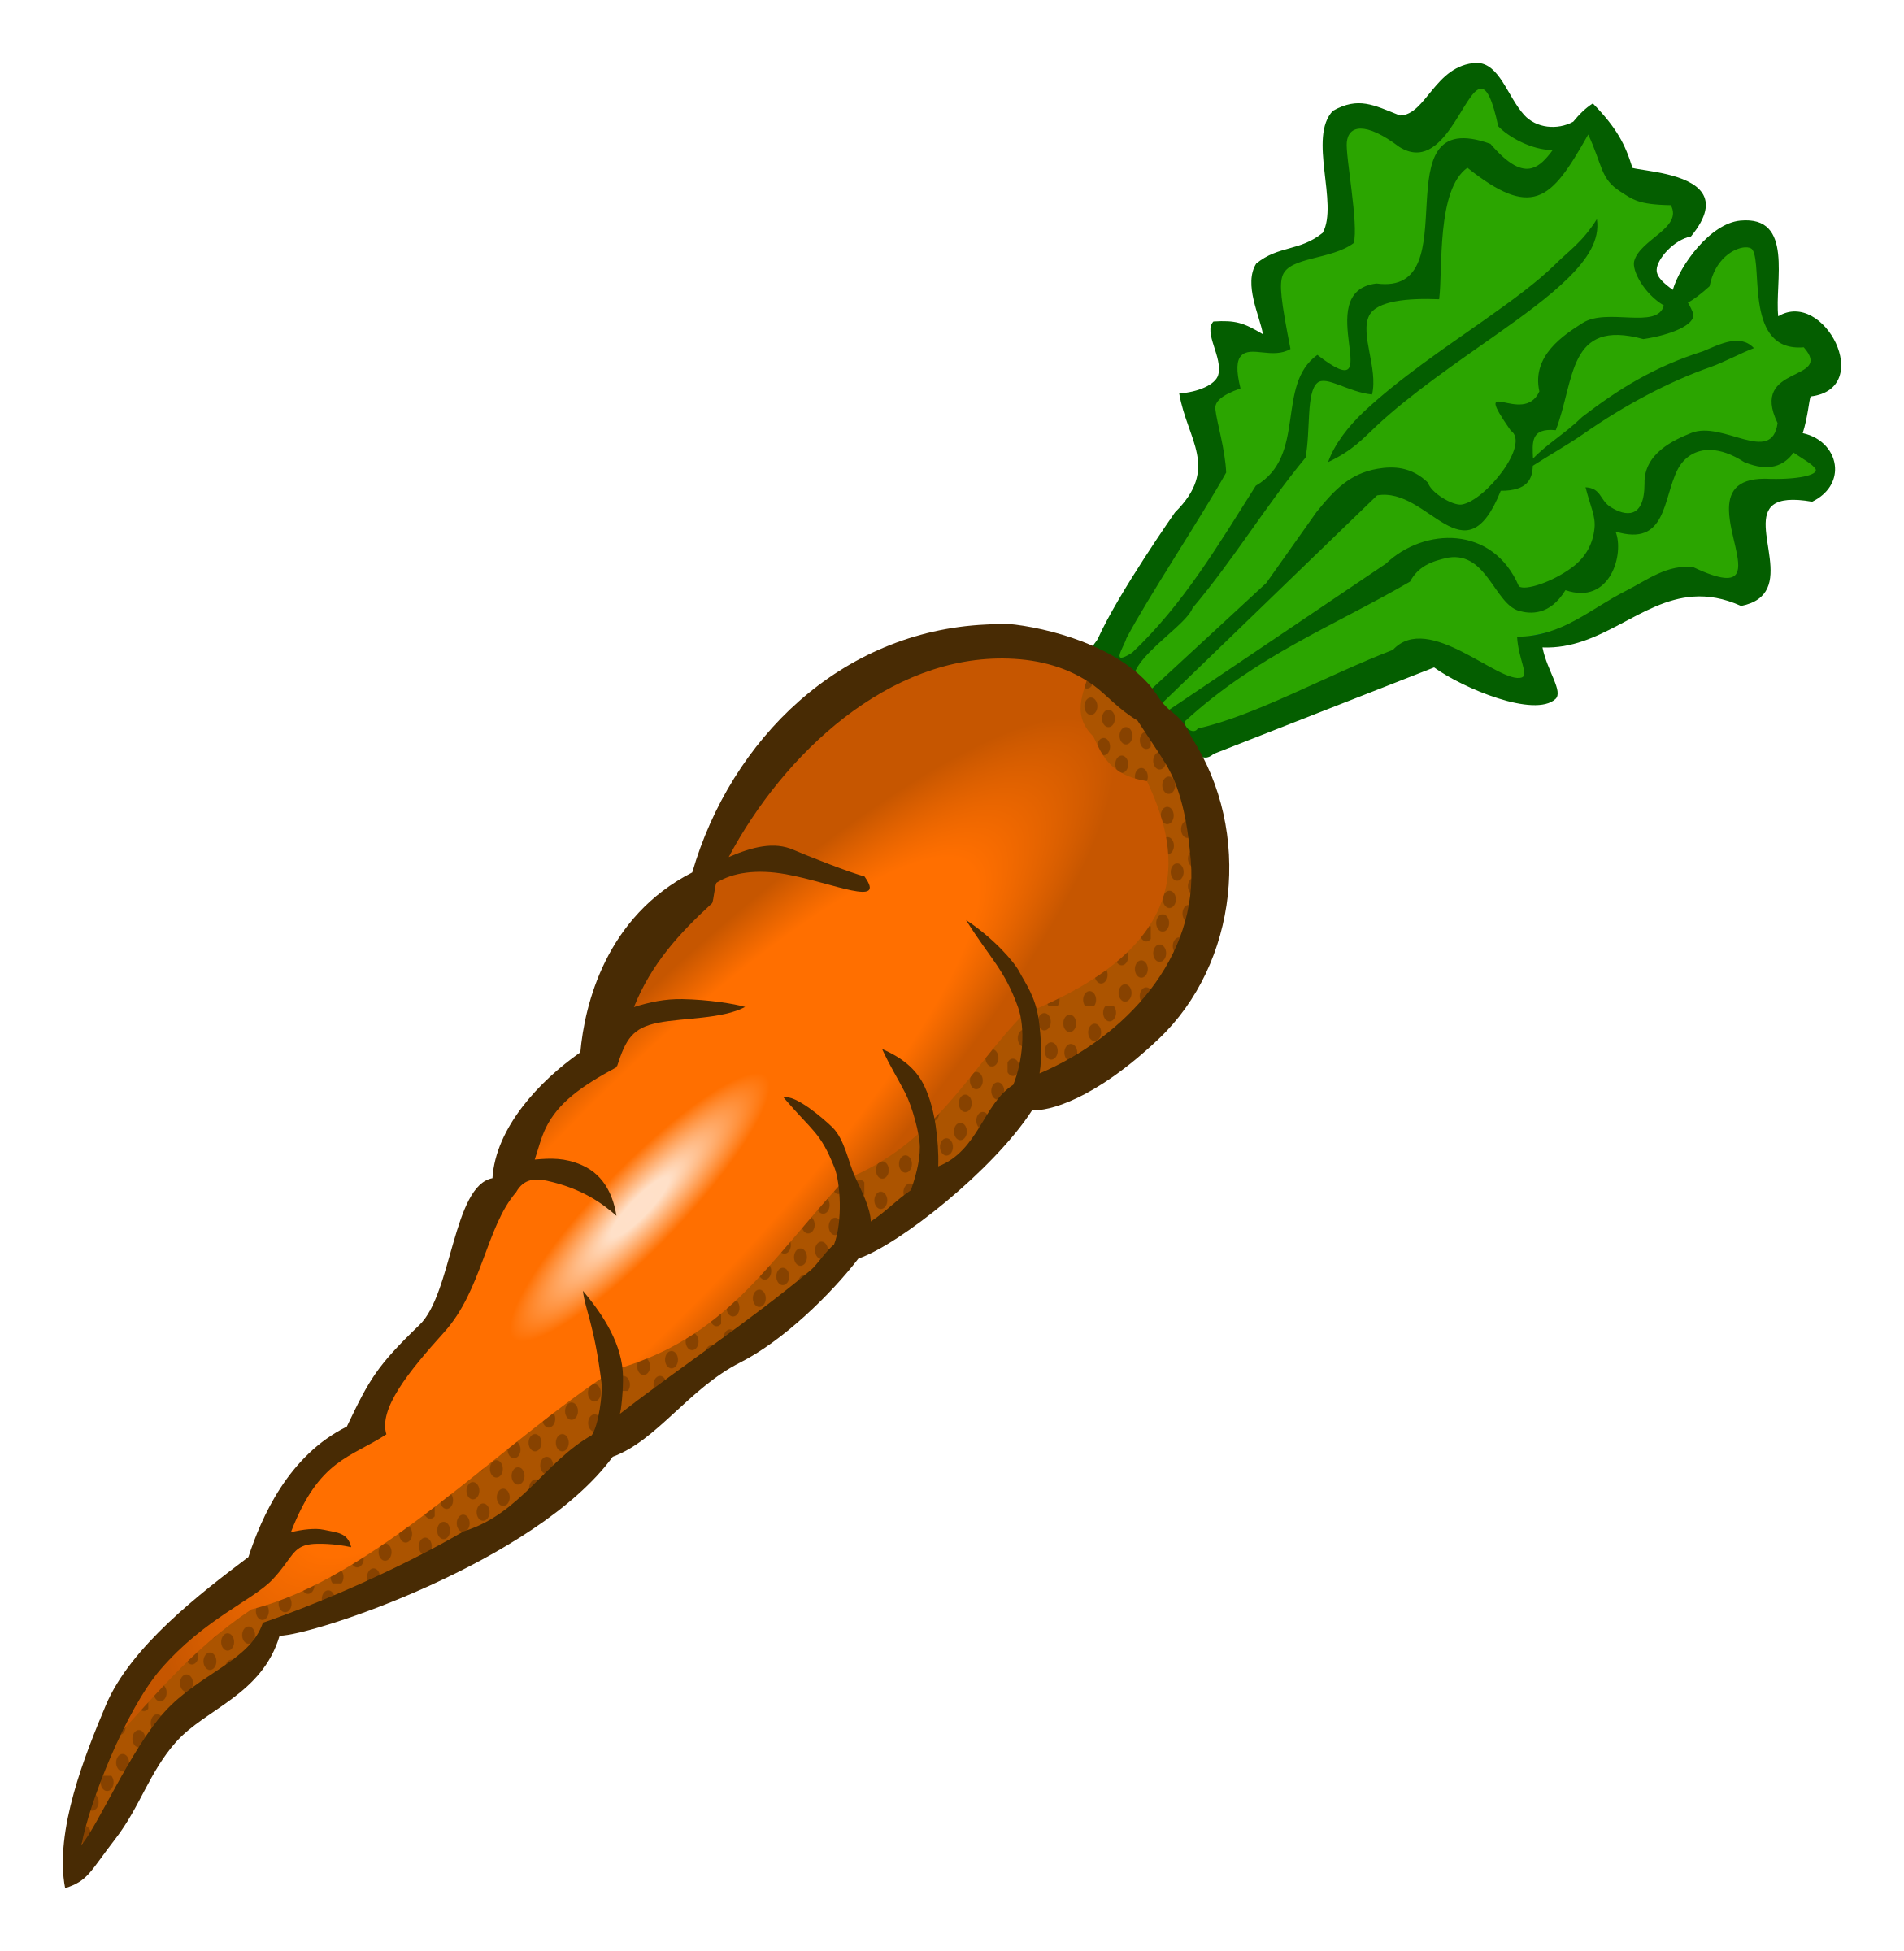 Juice clipart gajar. Carrot free collection download